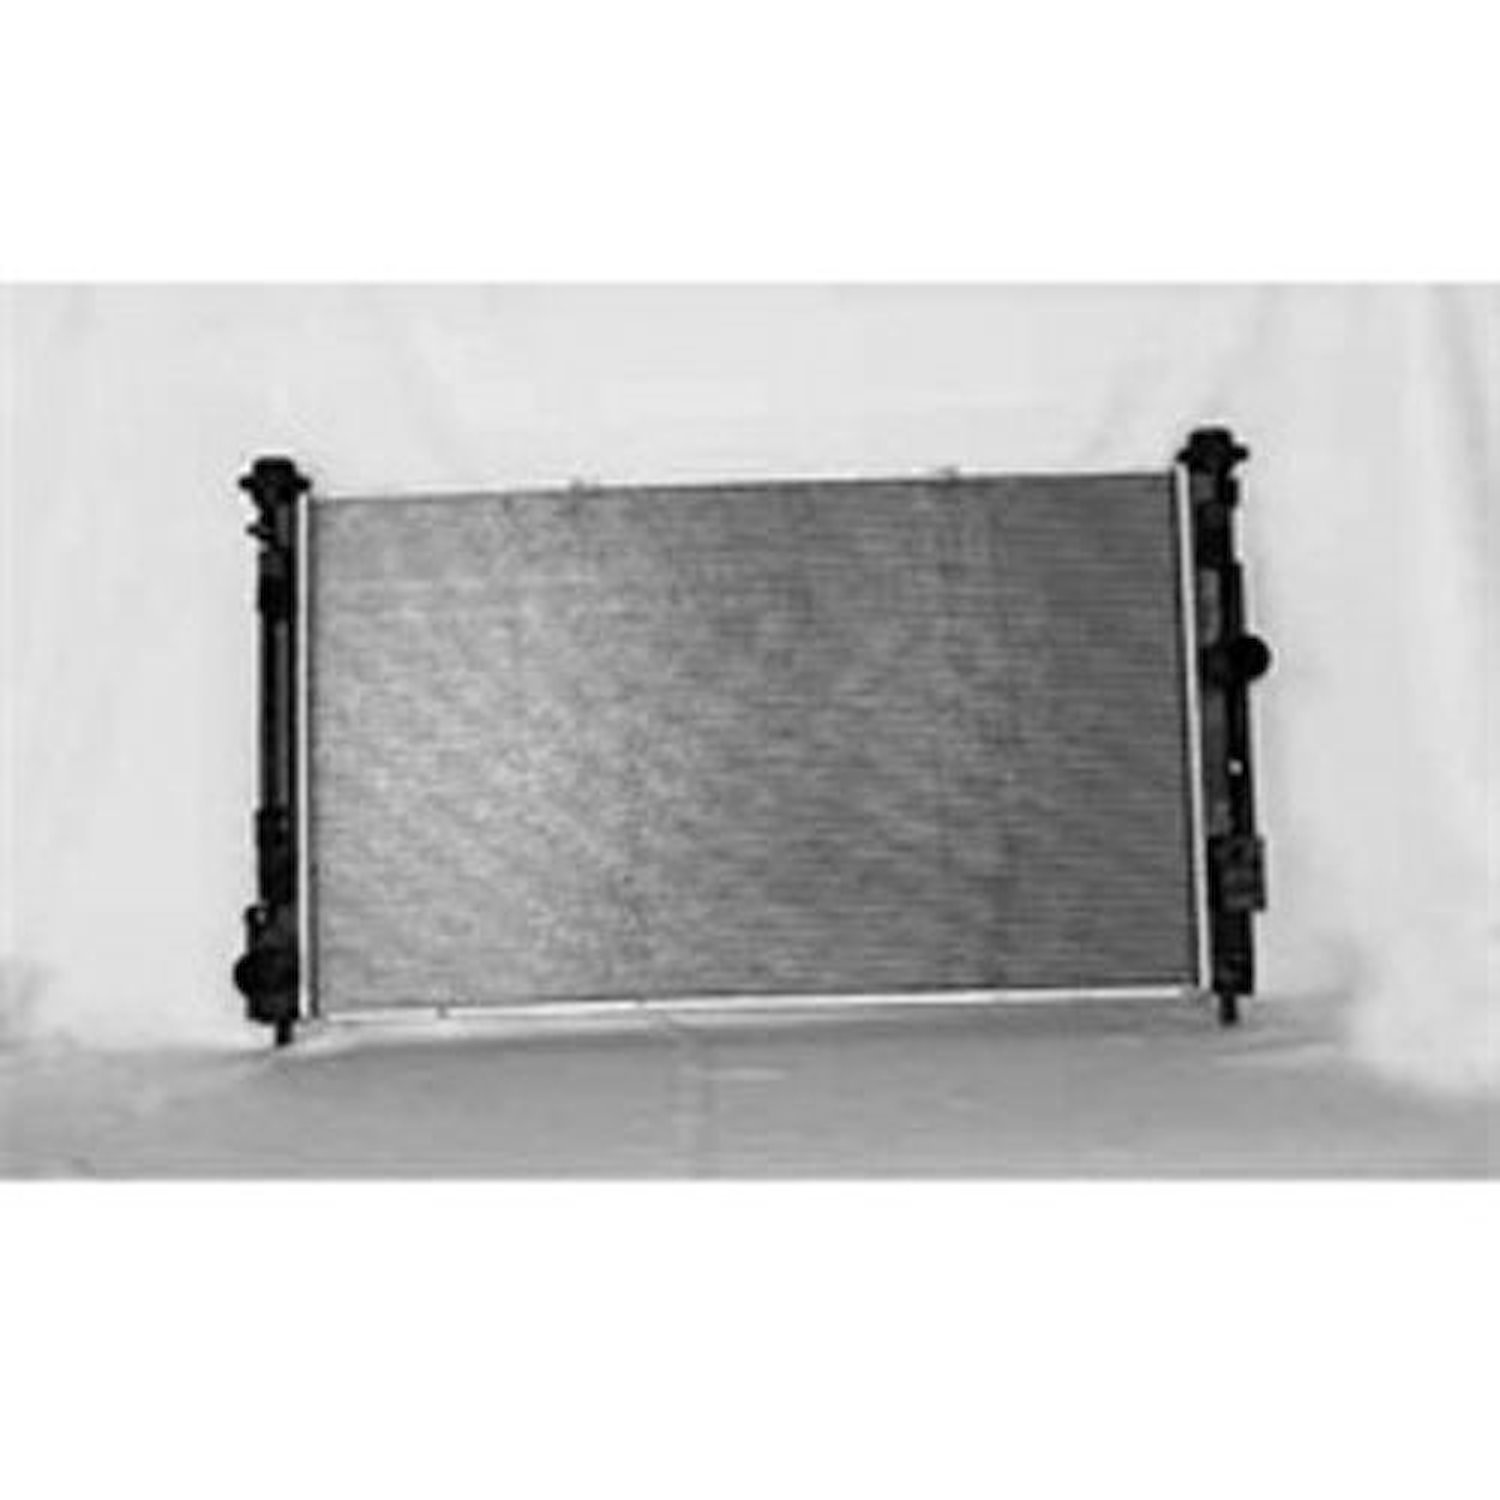 This 1 row radiator from Omix-ADA fits 07-10 Jeep Compass and Patriots with a 2.0L or 2.4L engine.